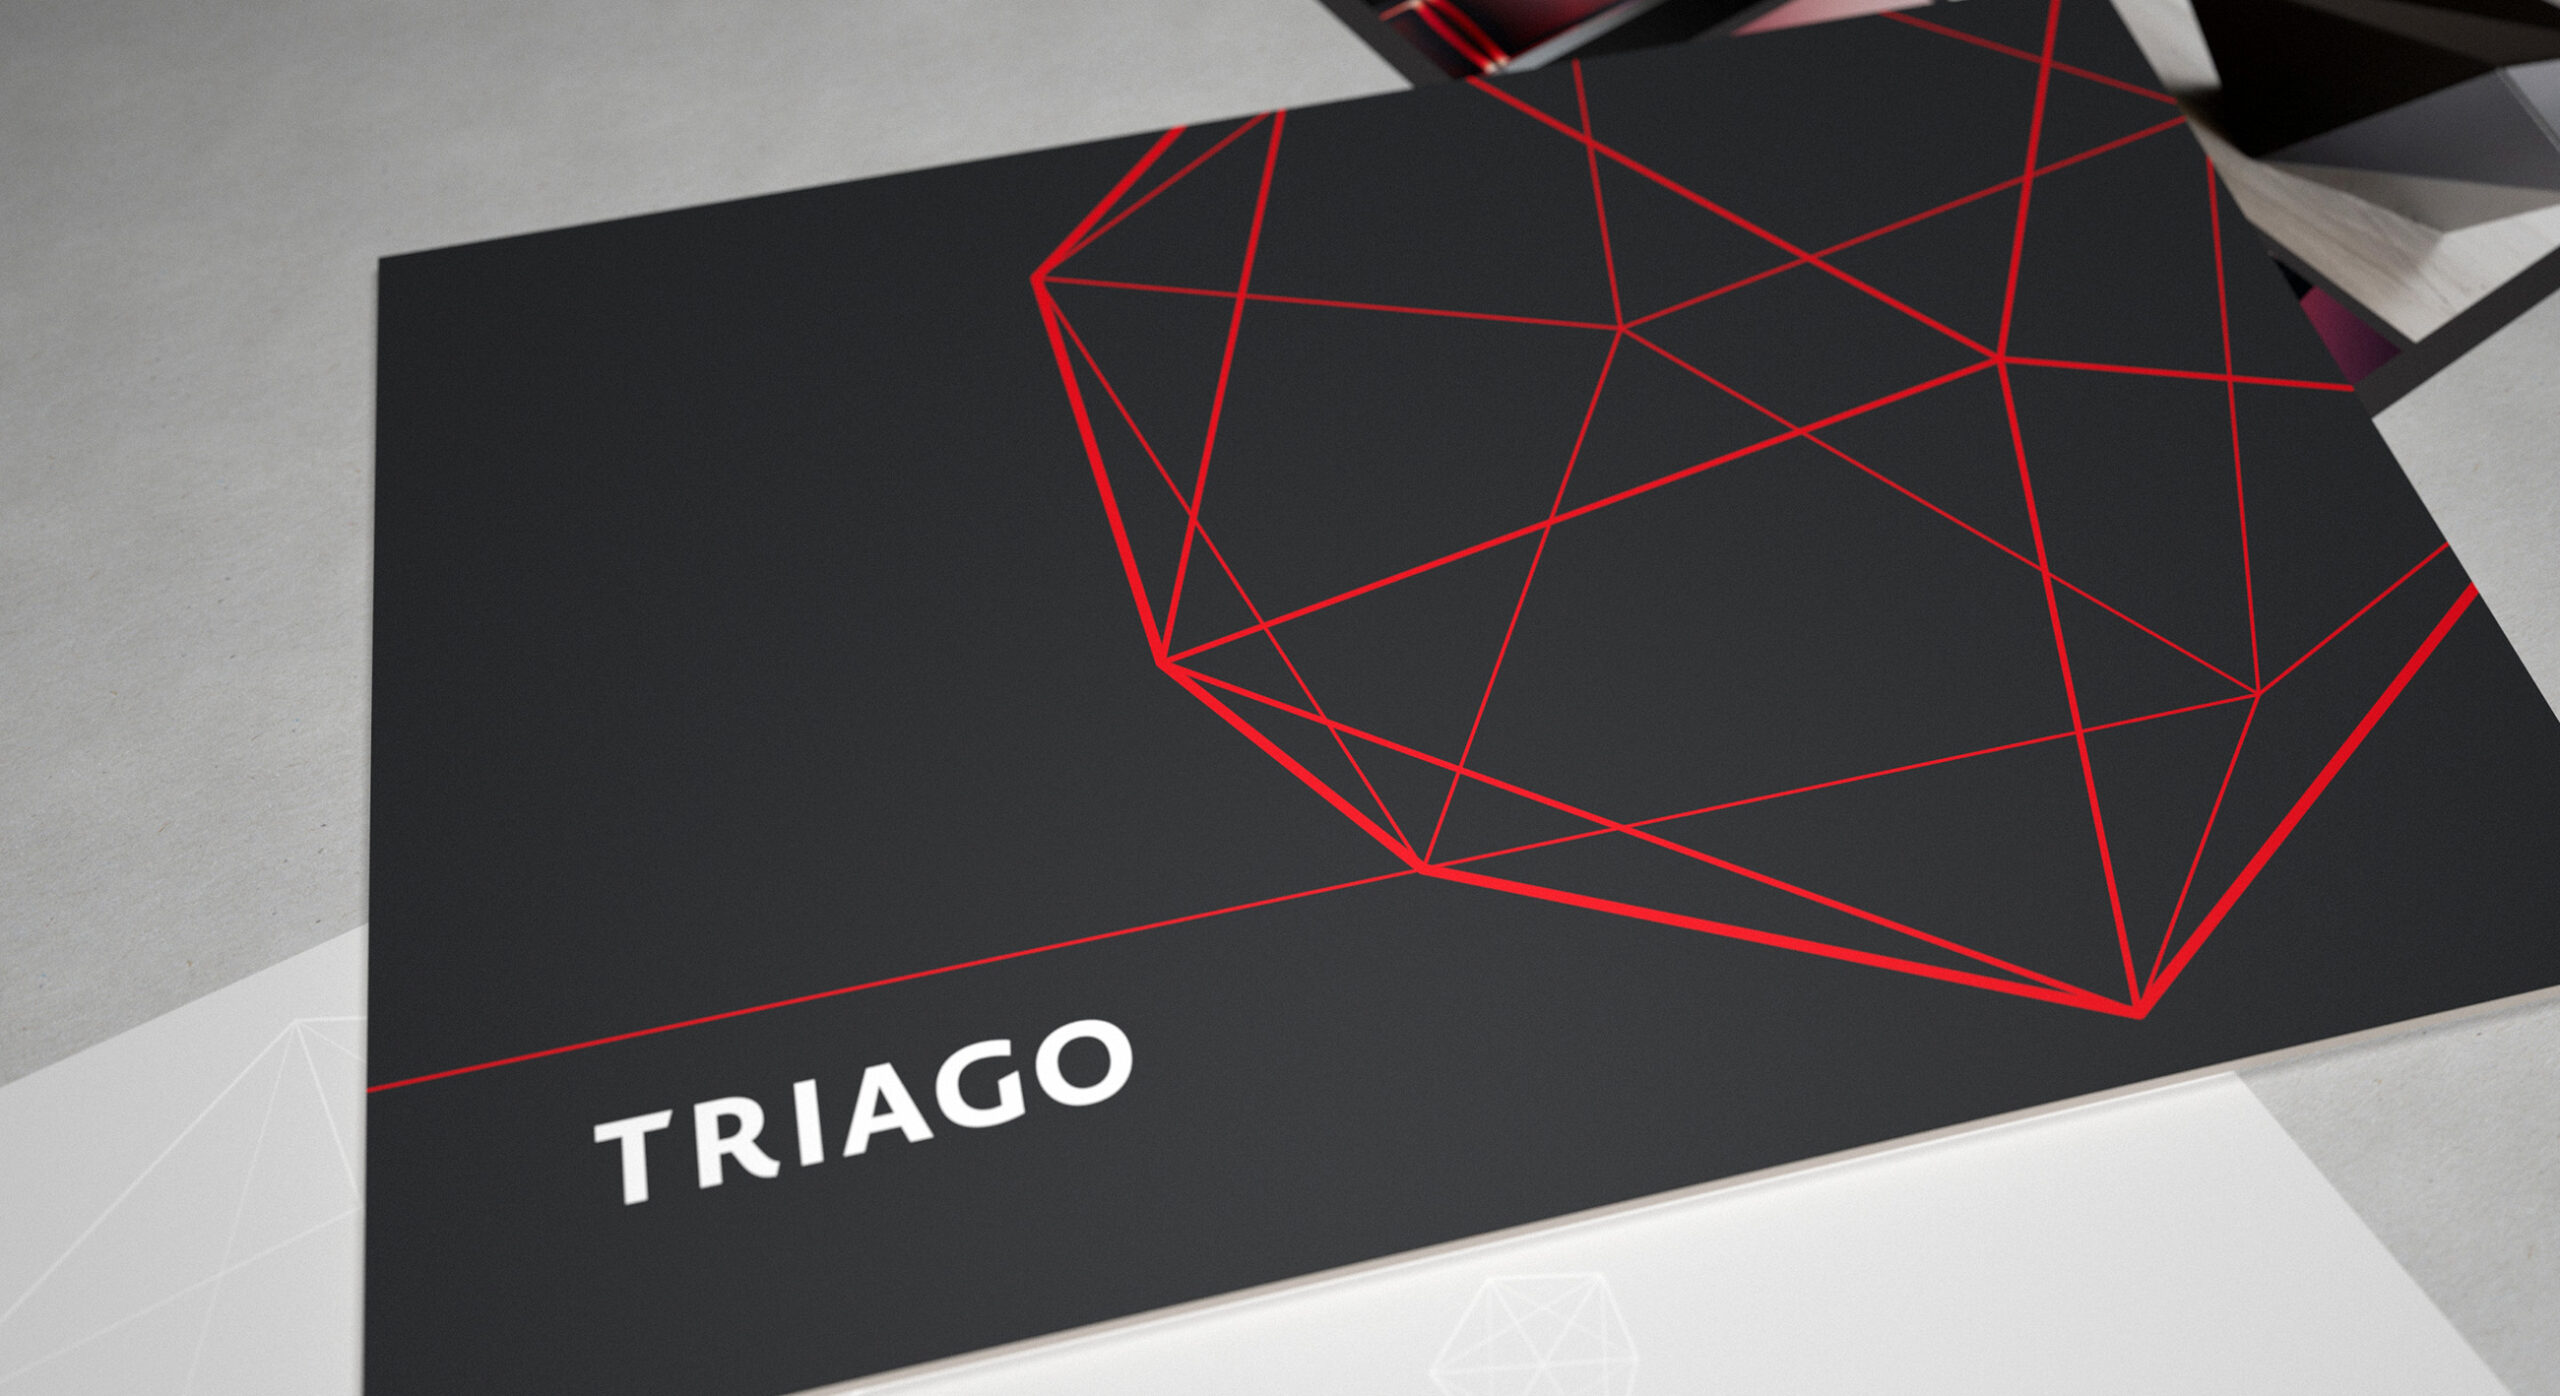 The Triago financial services brand identity uses a bold logotype, striking colour and a dodecahedra based supporting graphic device.